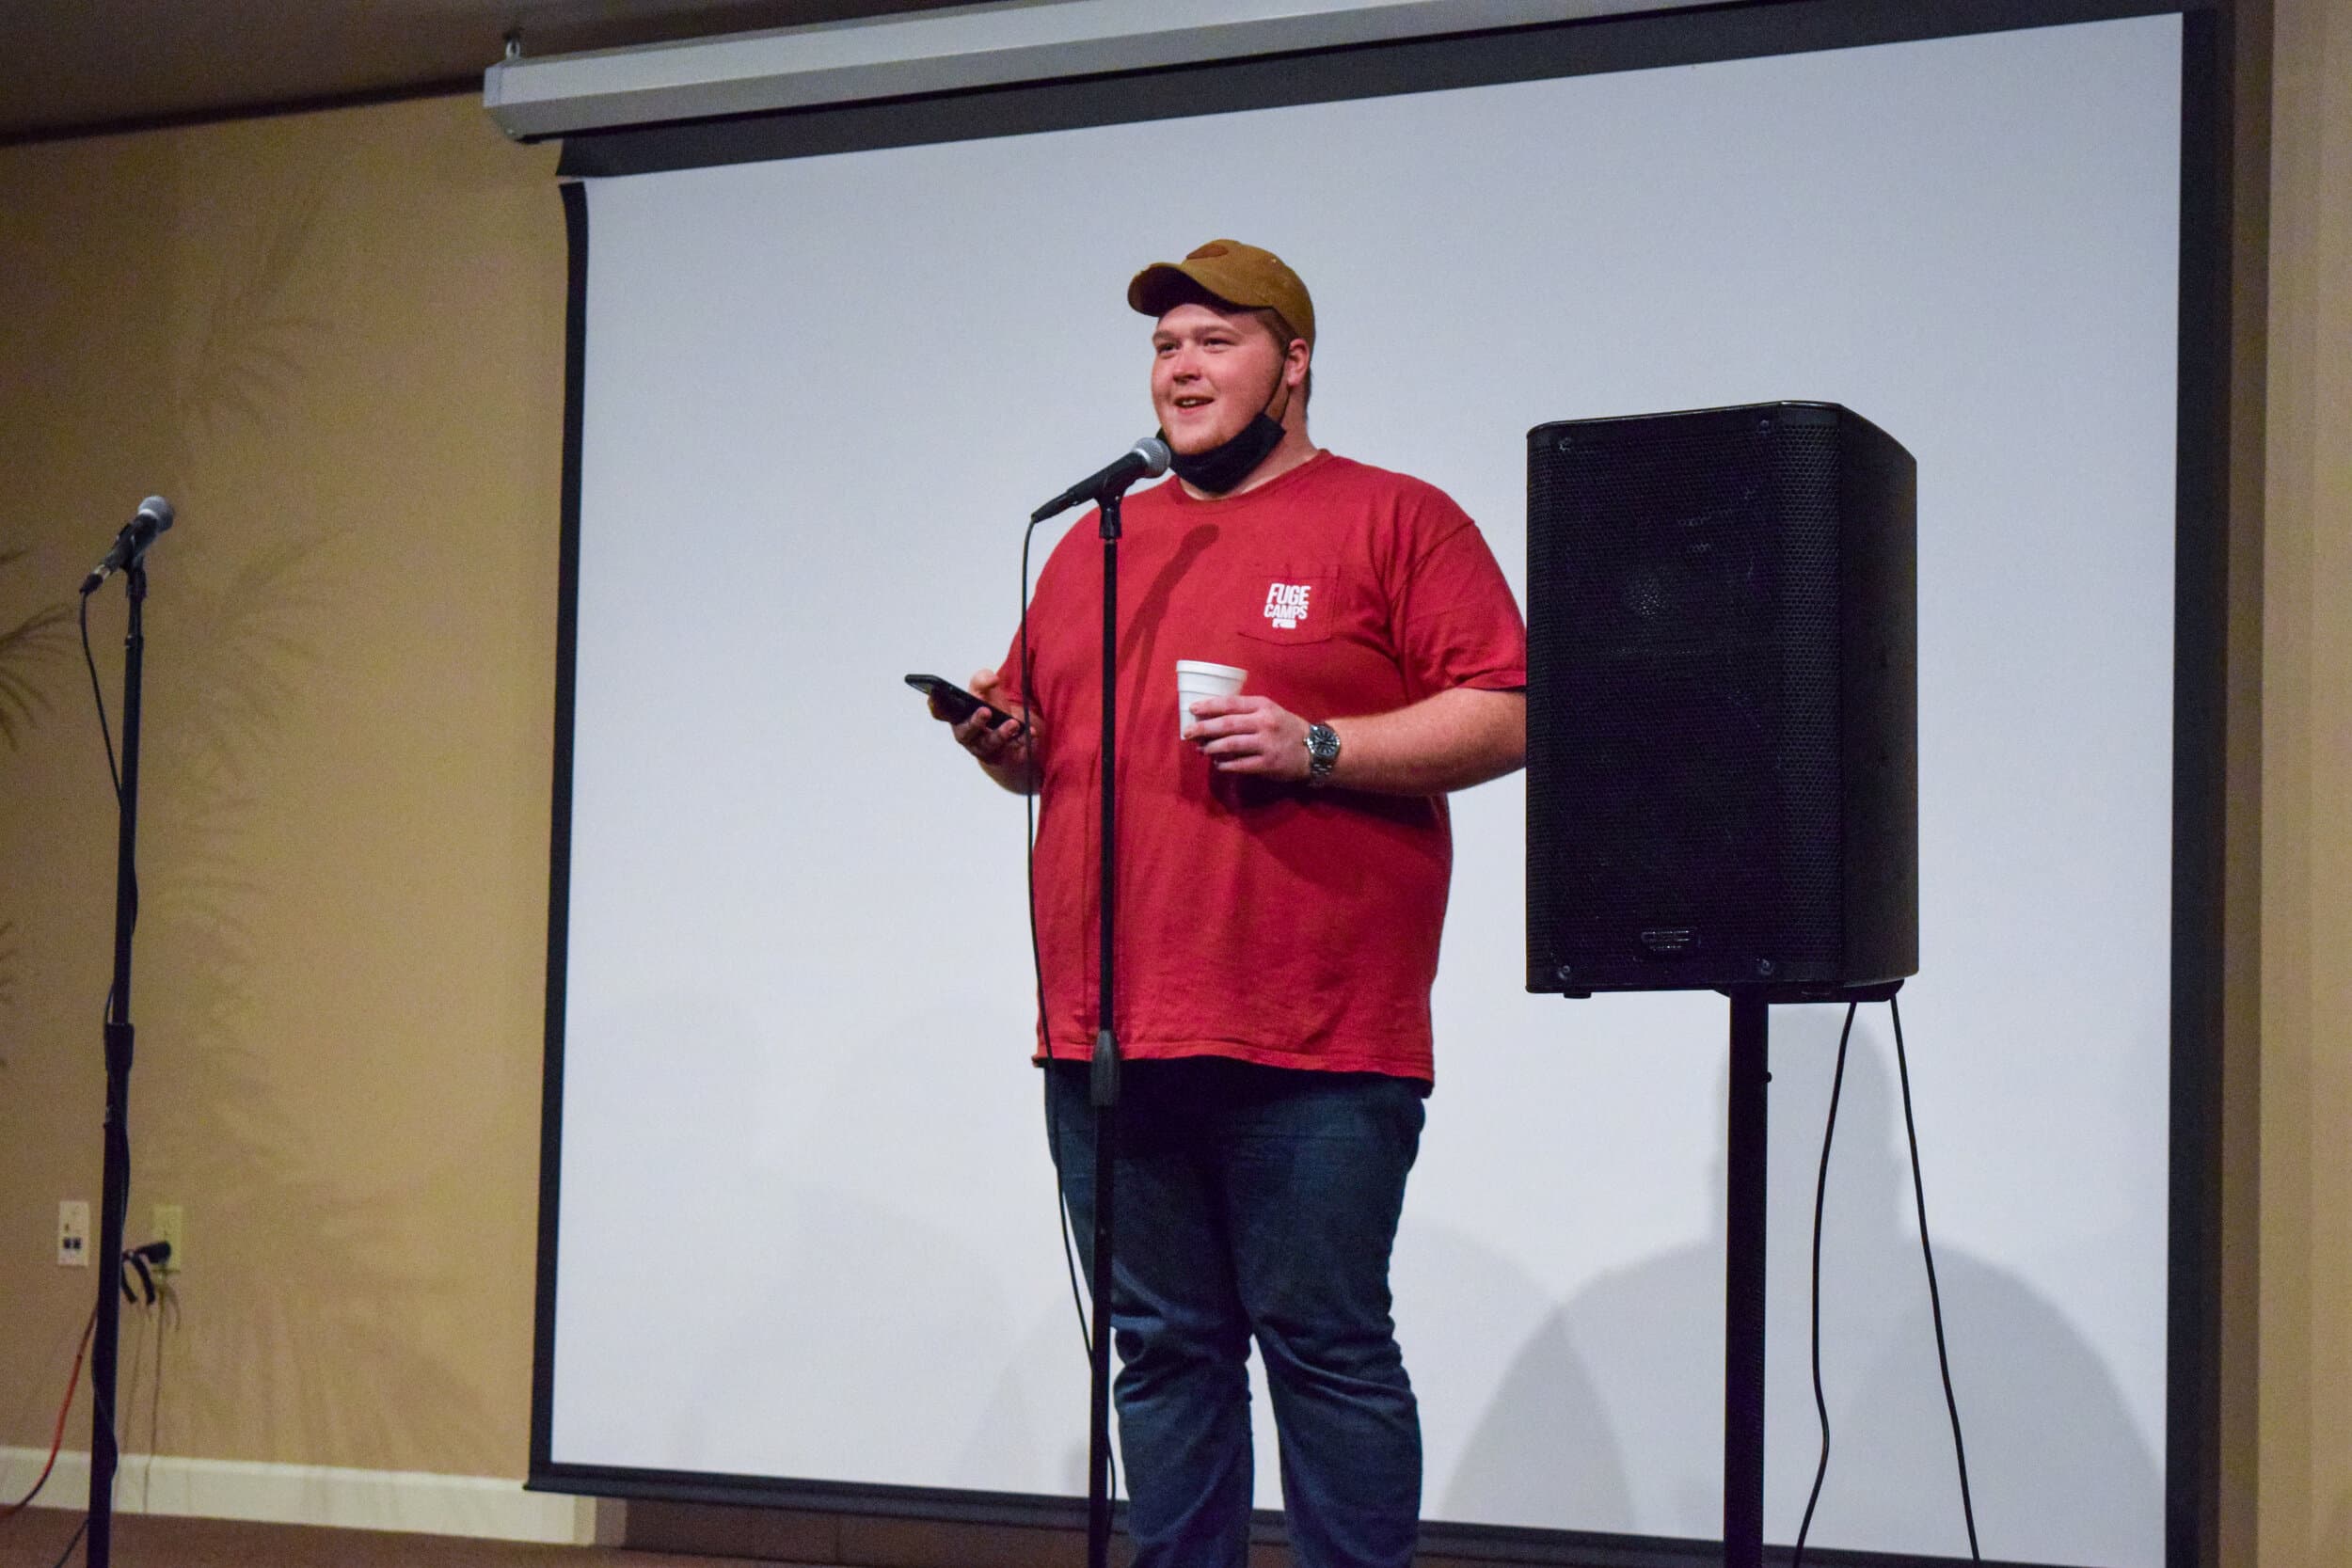 Blake Patton, graduate assistant for Student Activities, is the MC at Coffee House.